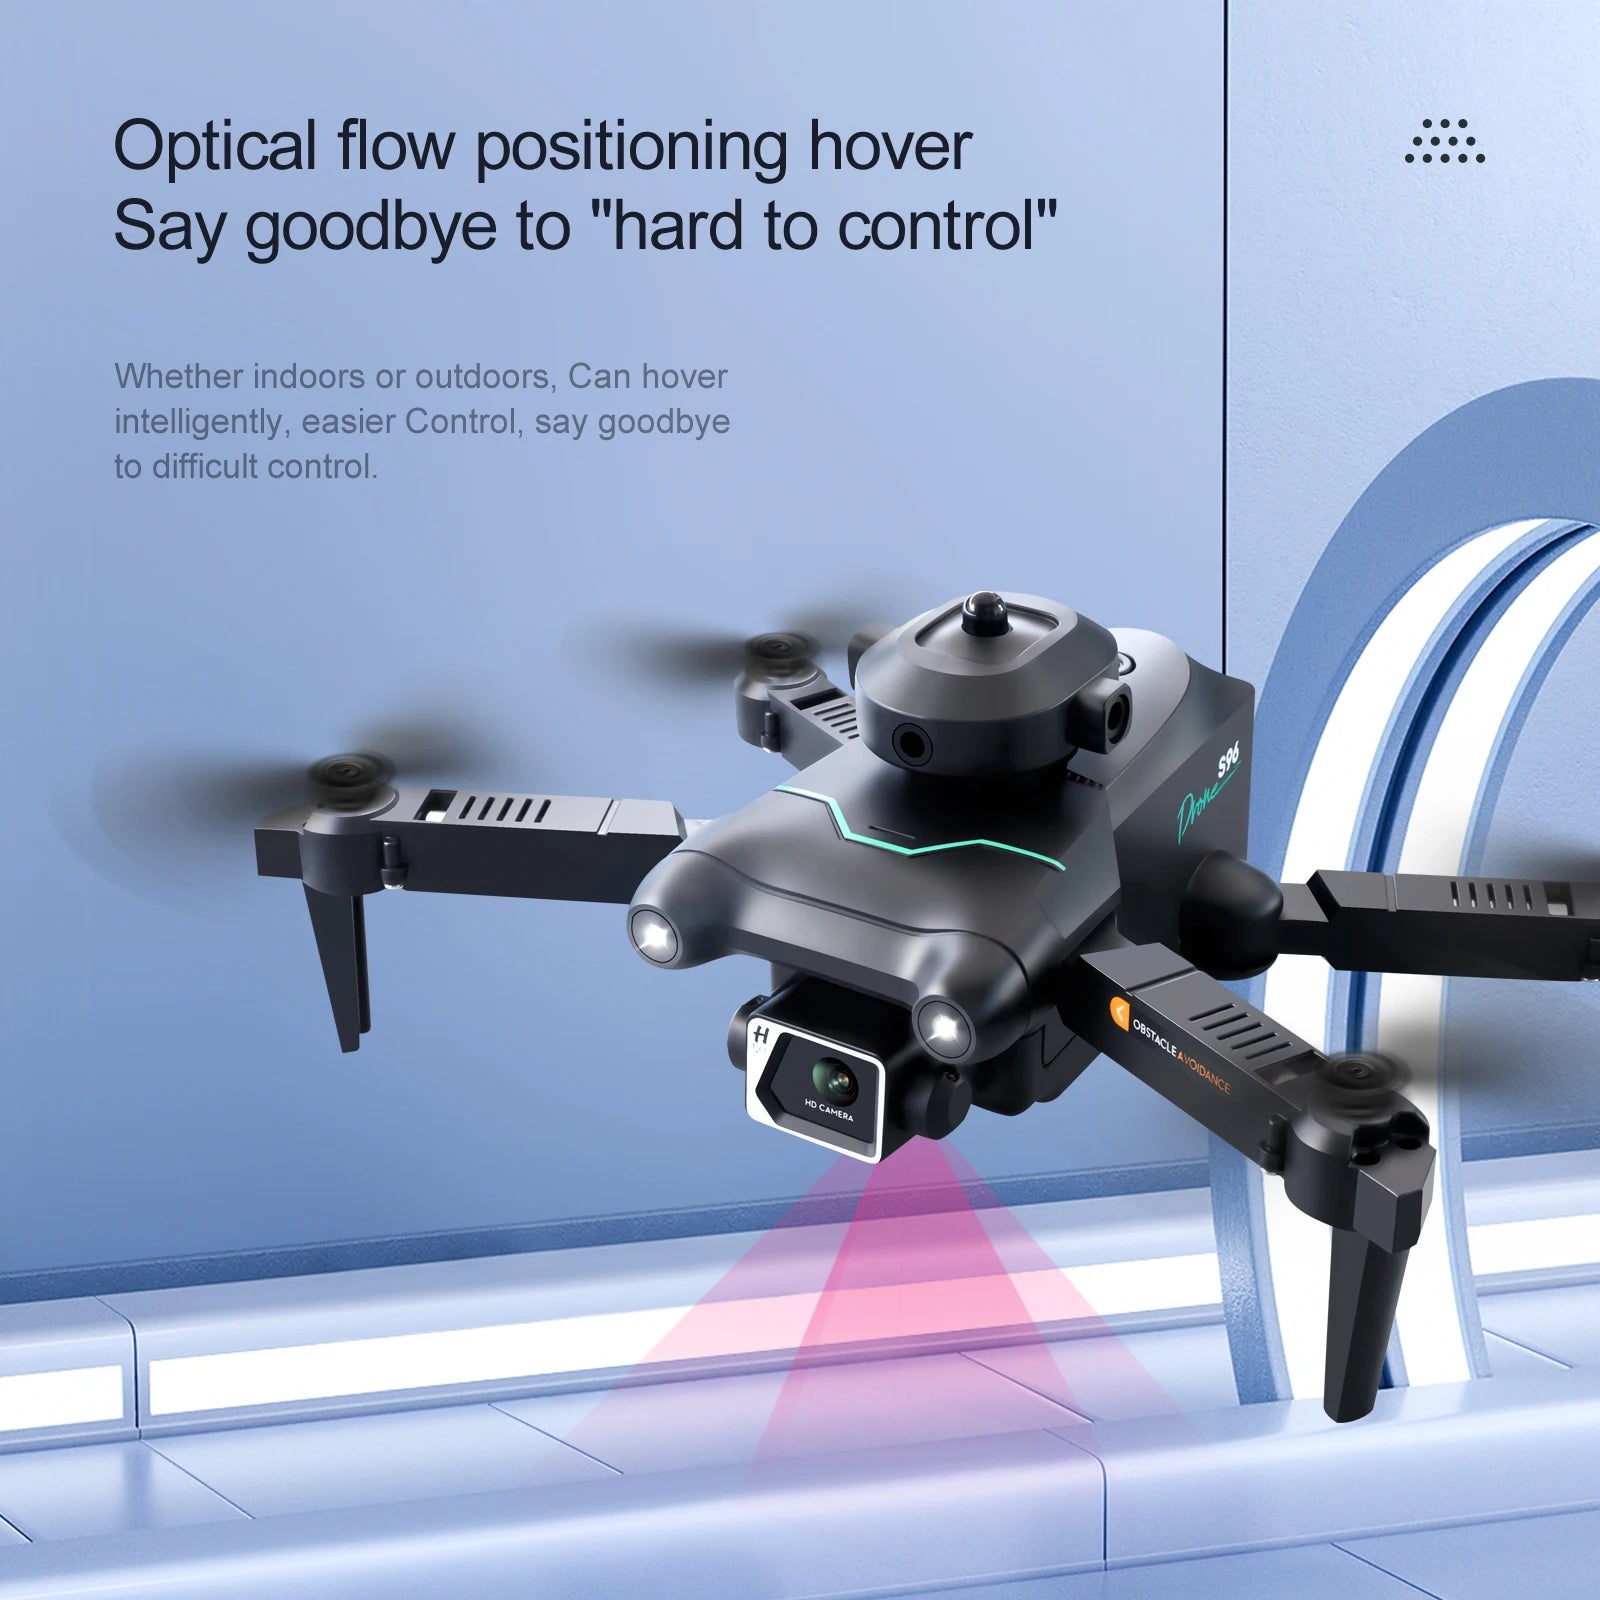 S96 Mini Drone, optical flow positioning can hover intelligently, easier control, say goodbye to